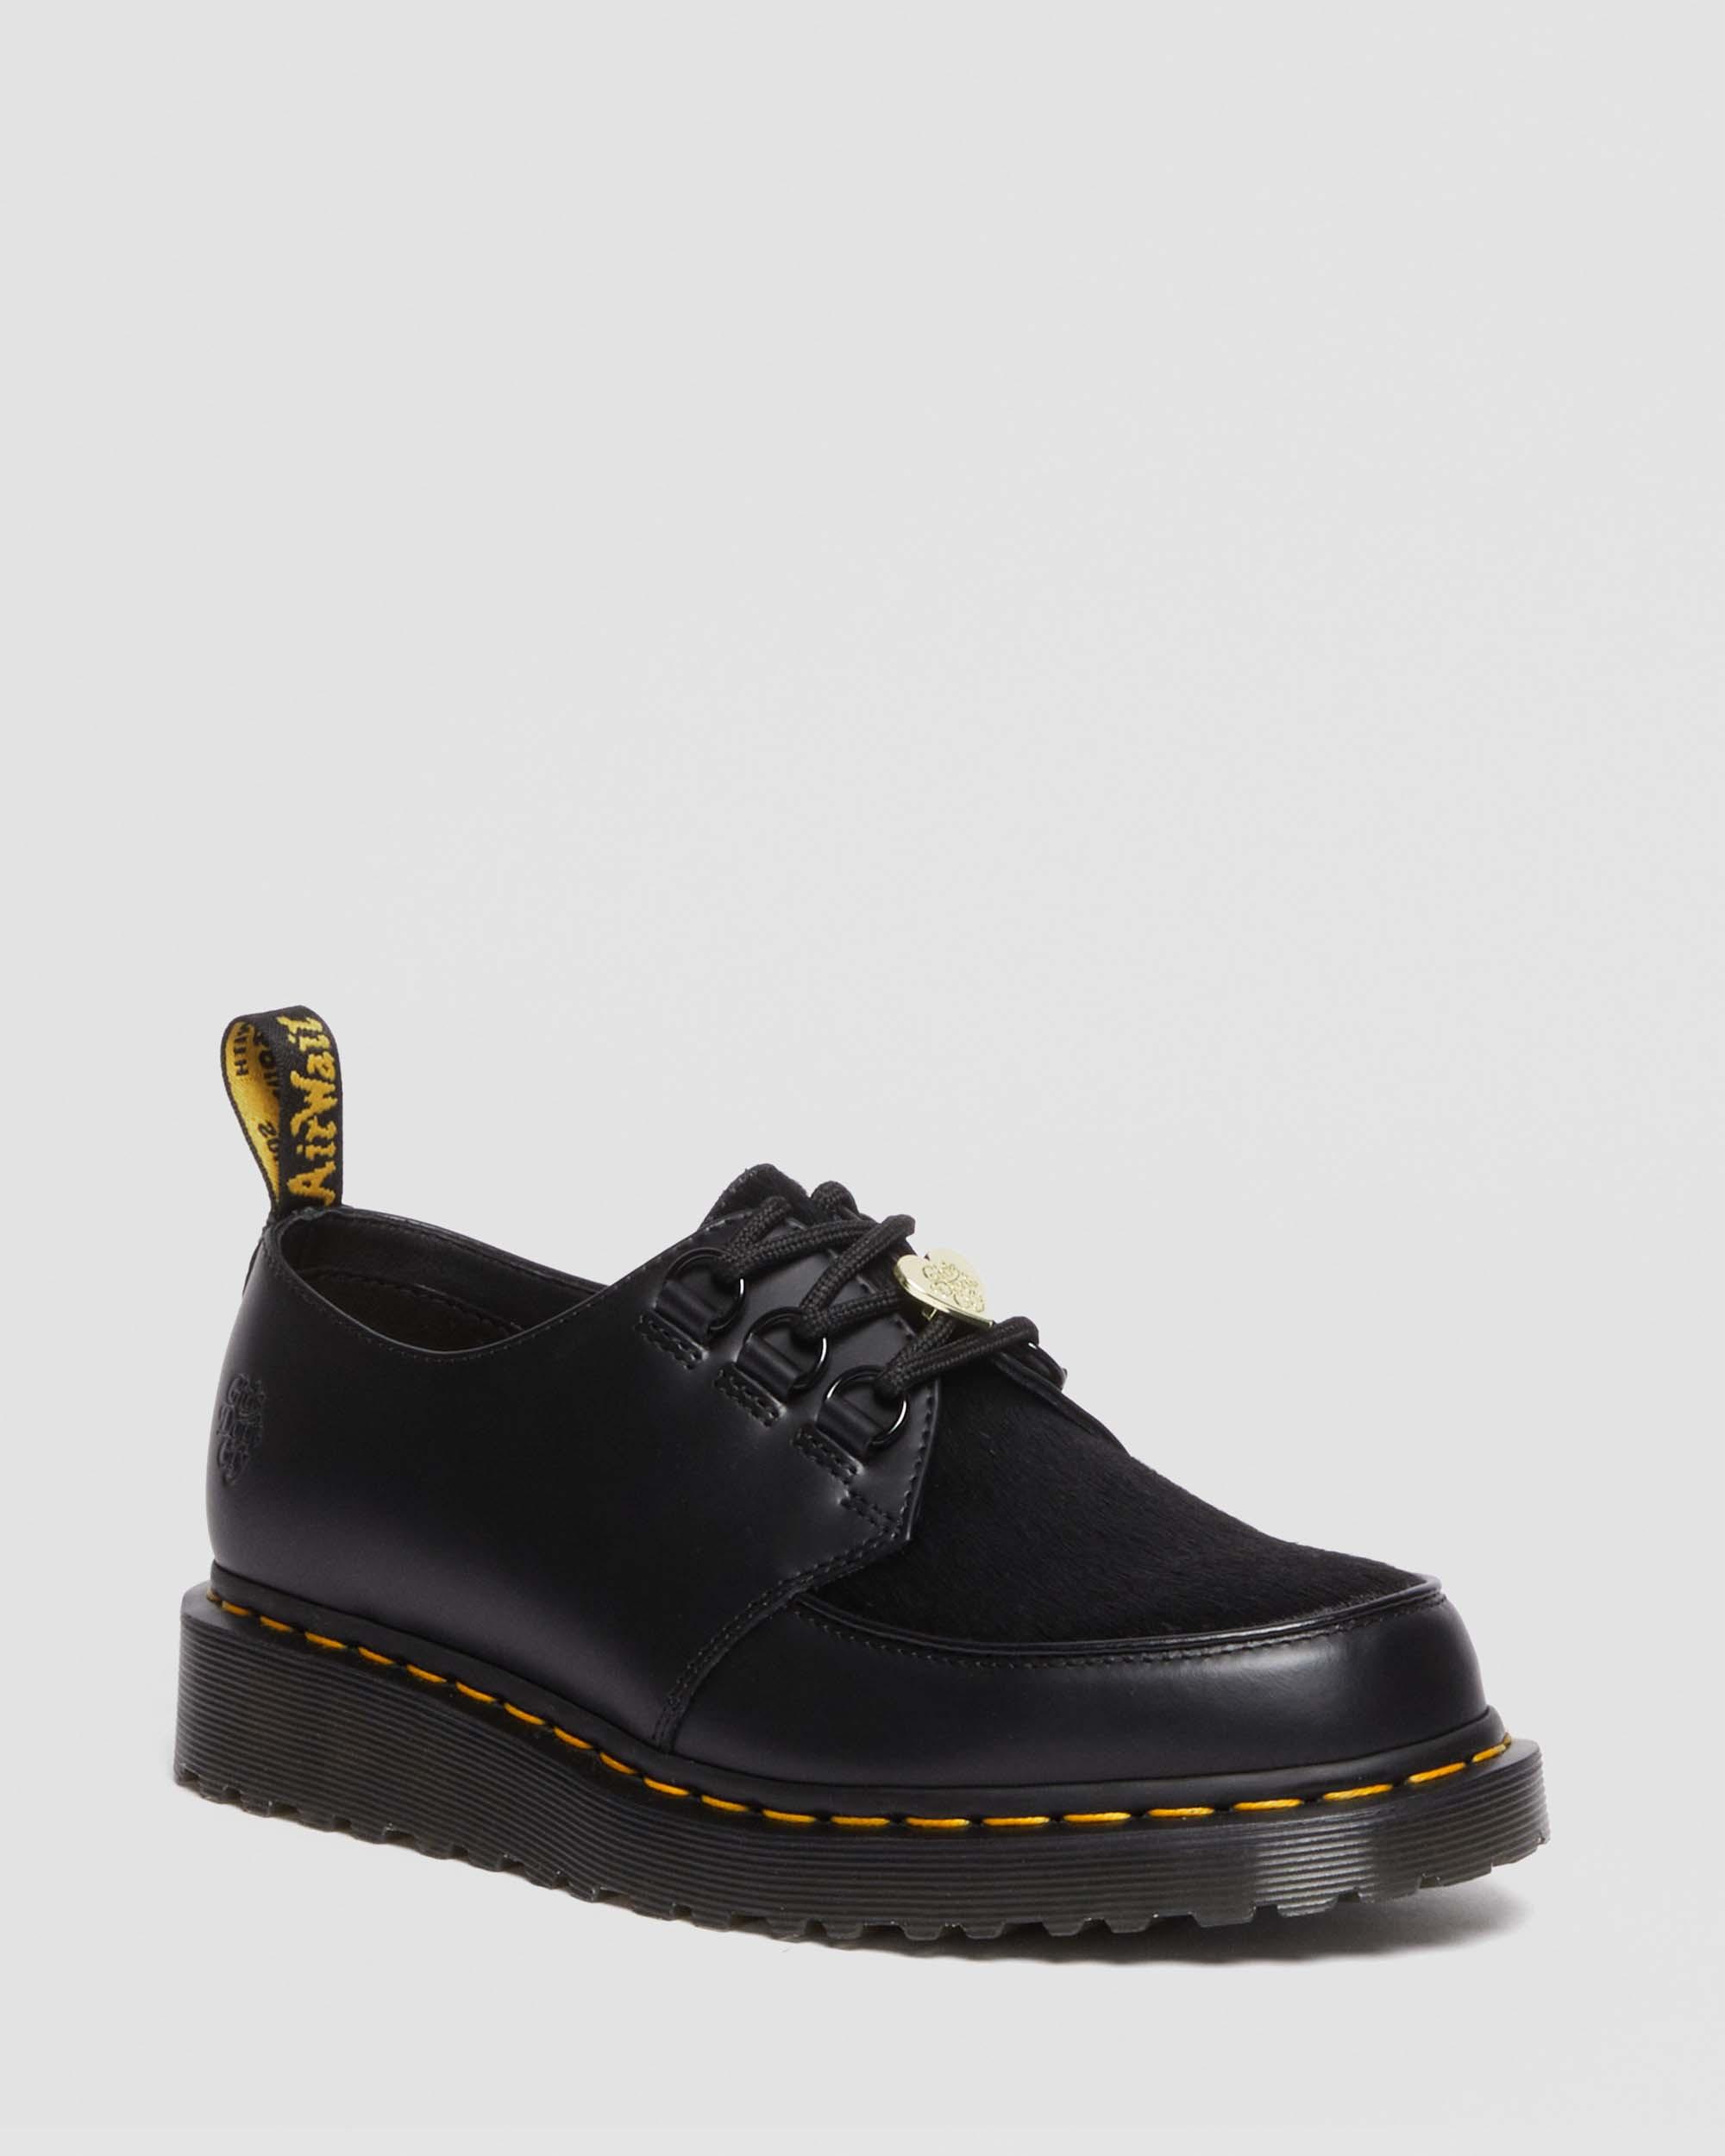 Ramsey Girls Don't Cry Hair-on Leather Creeper Shoes in Black